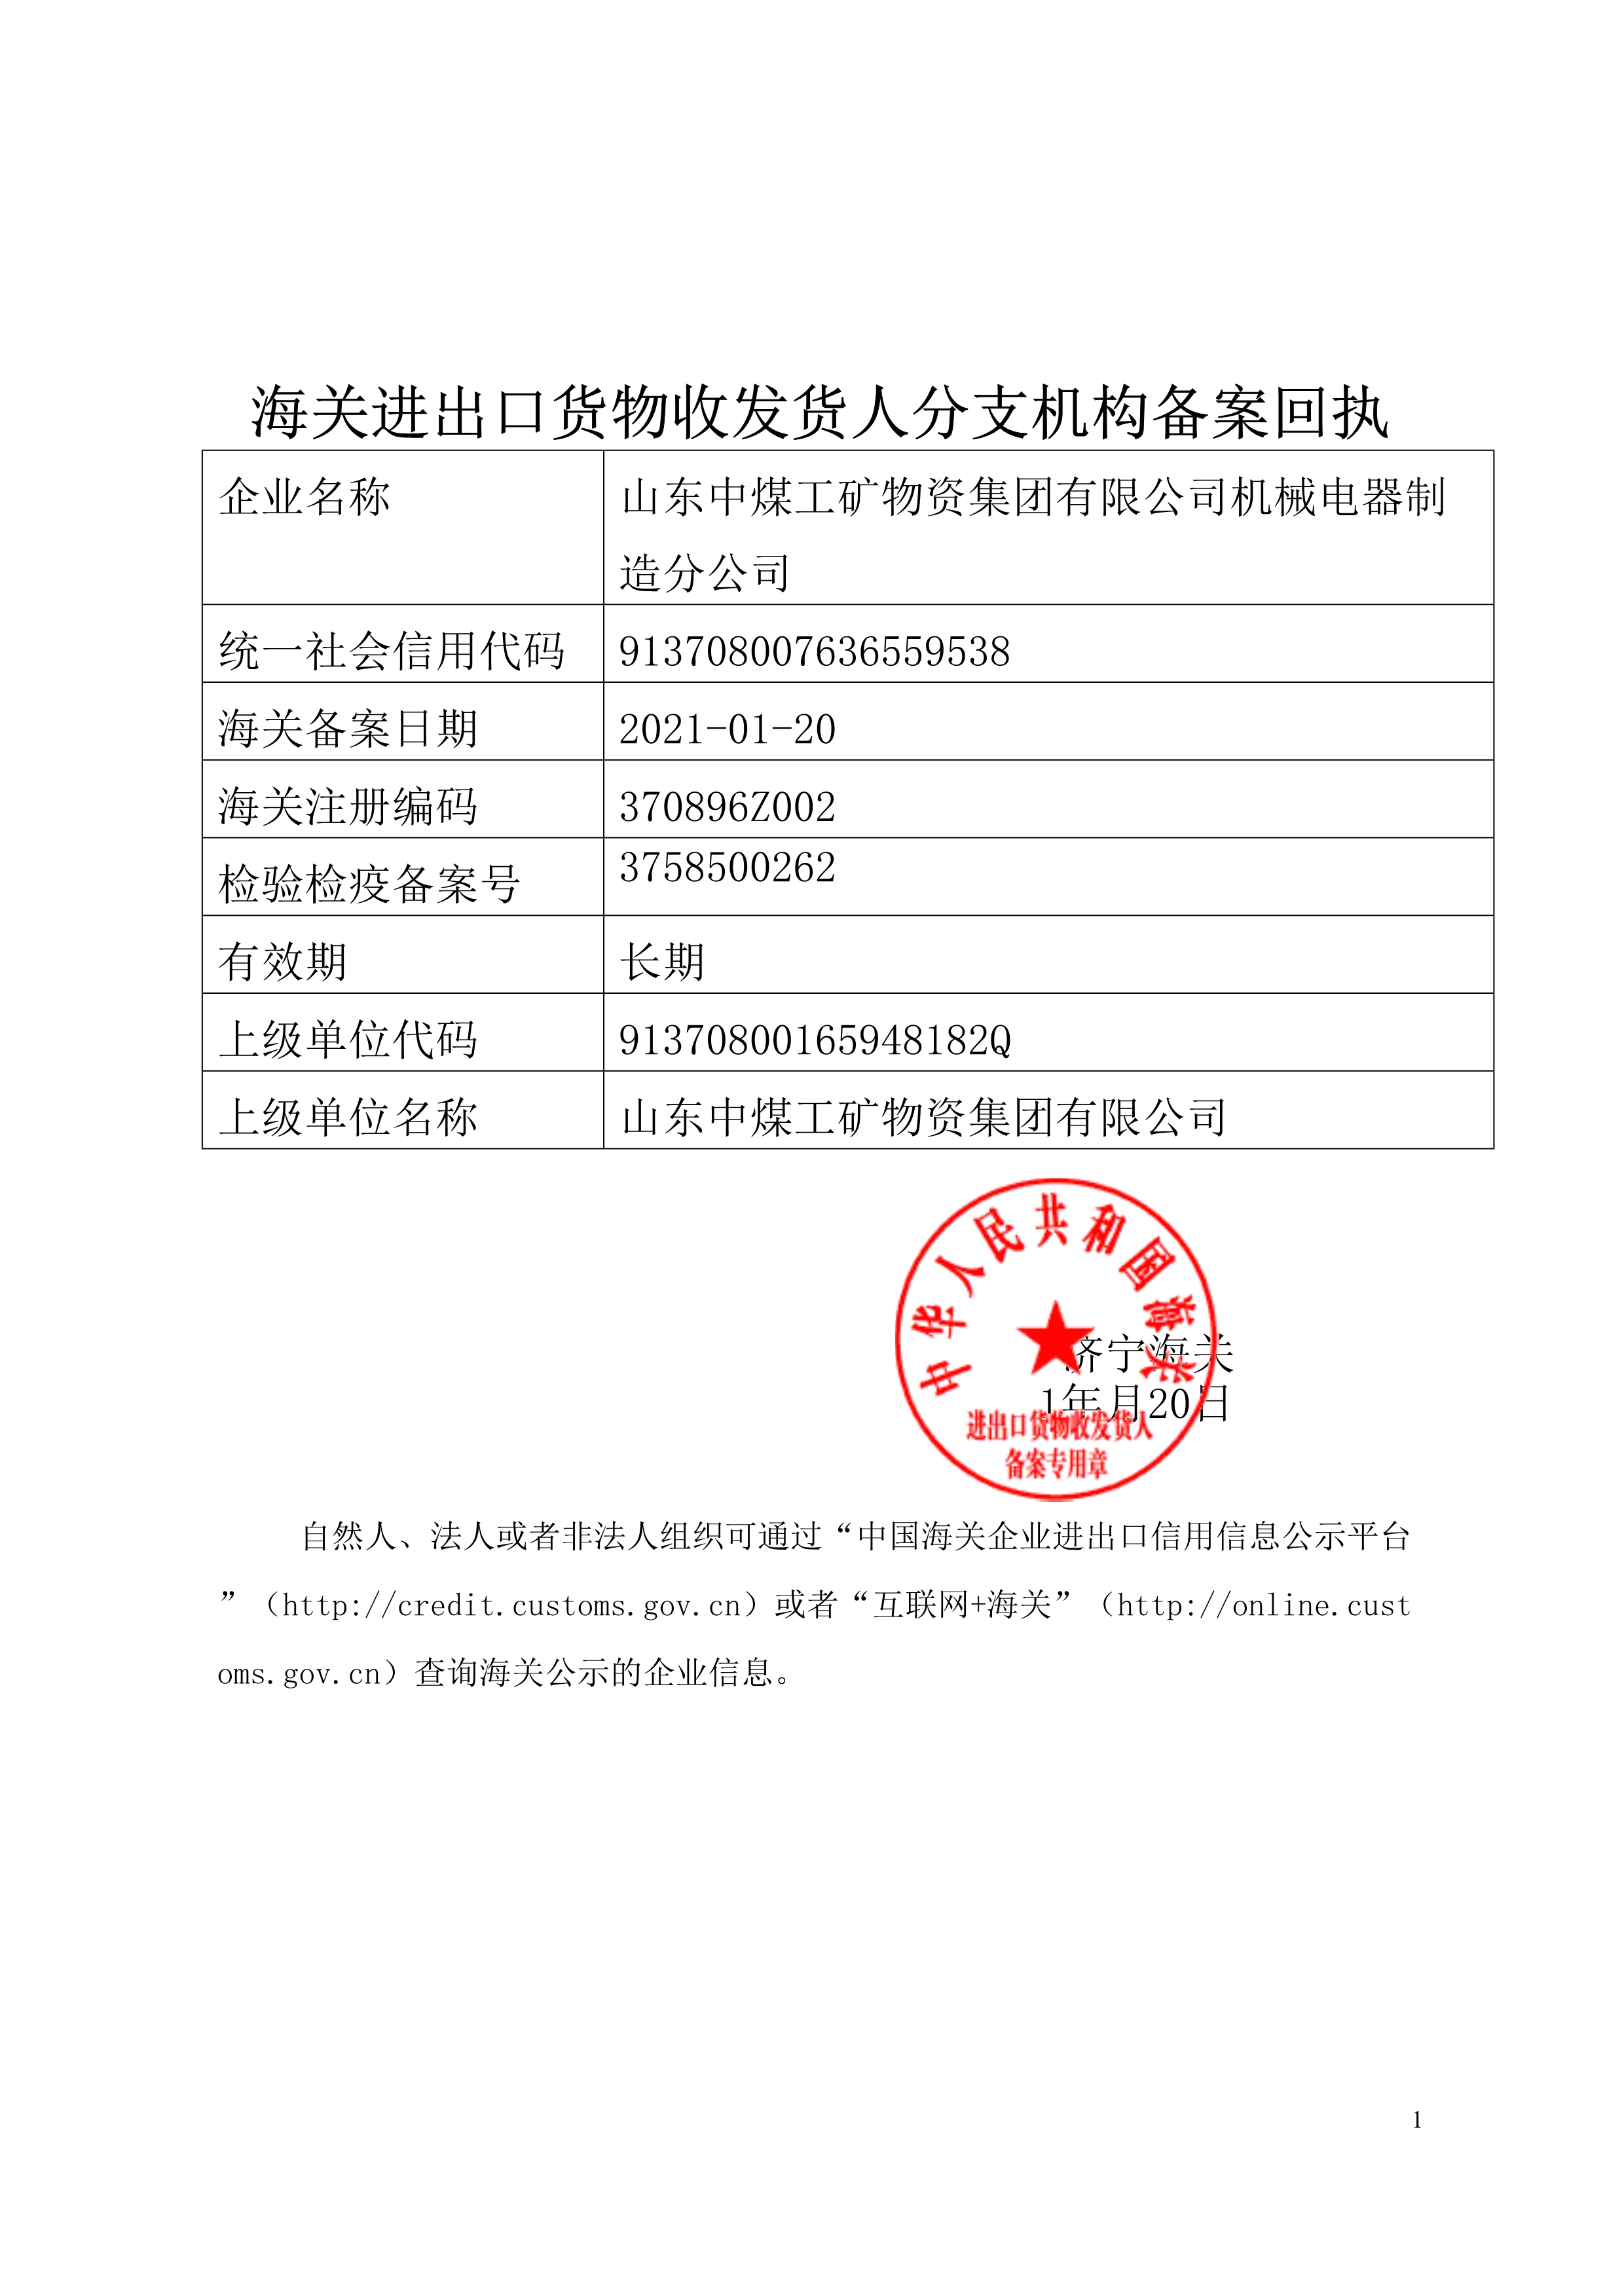 foreign trade Record registration form